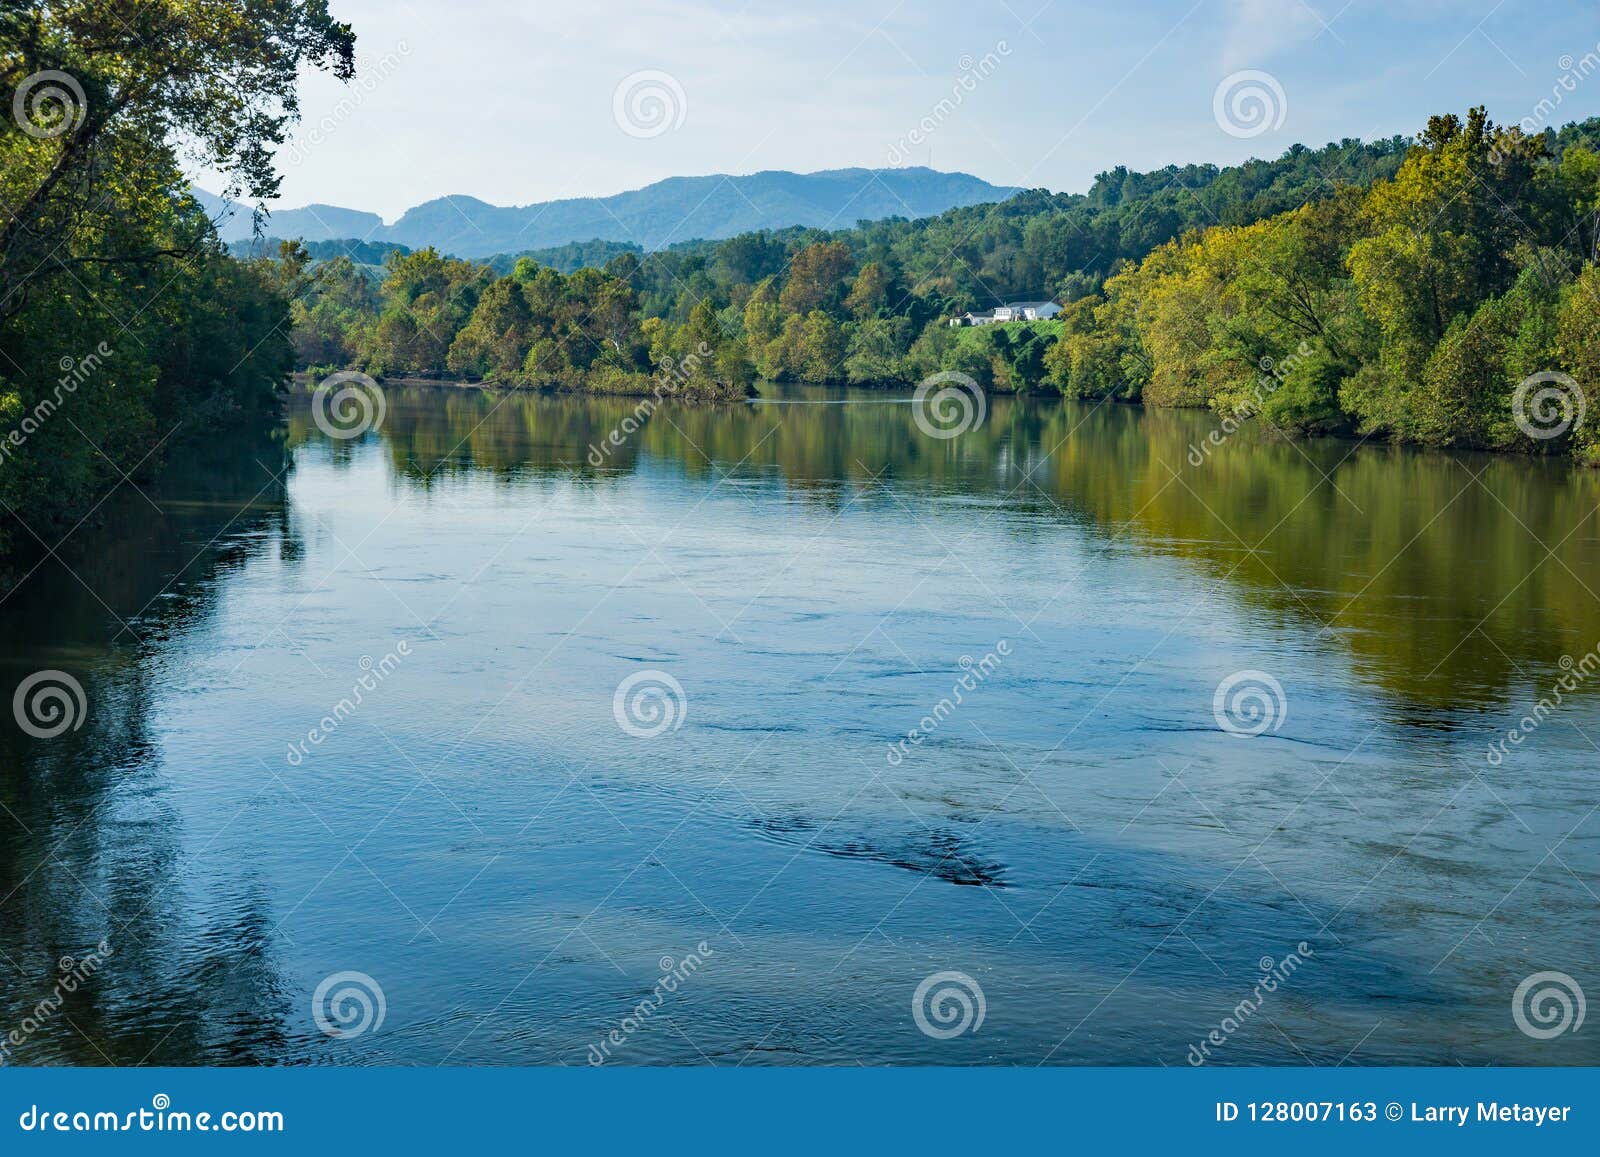 an early fall view of the james river, virginia, usa